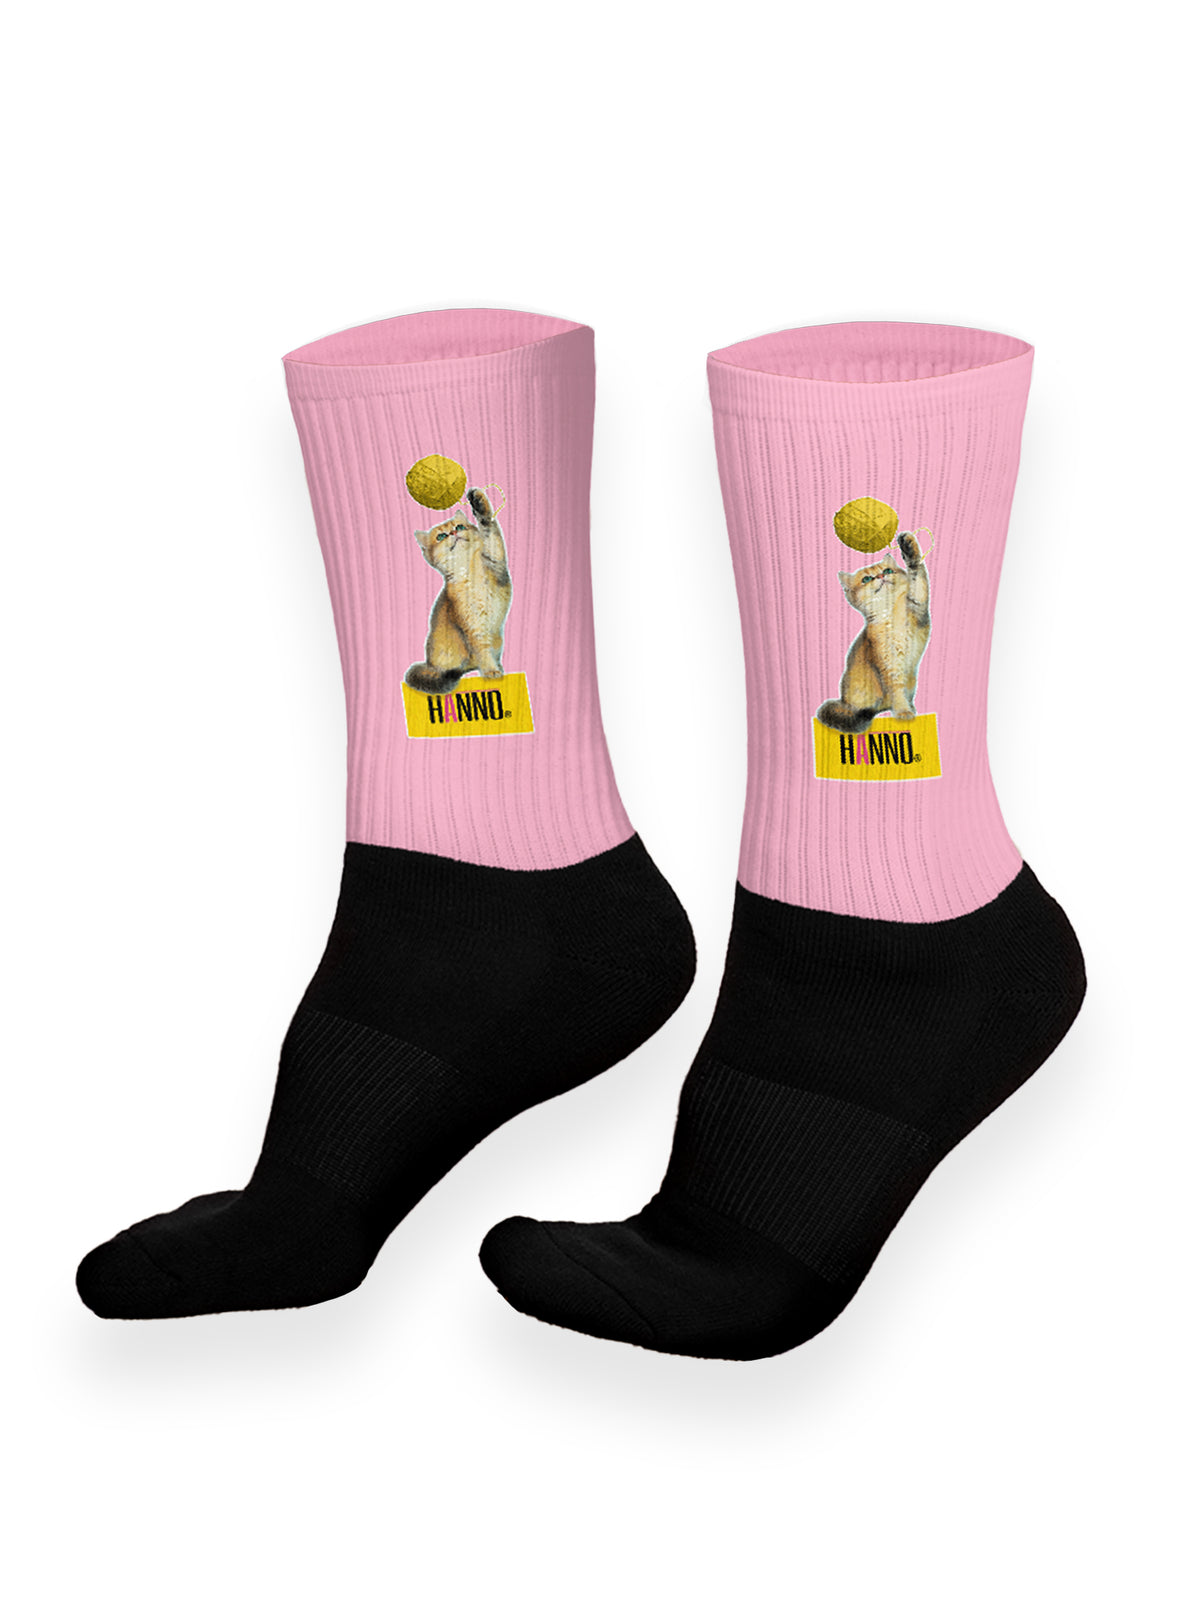 pink socks with a cat playing in pink color